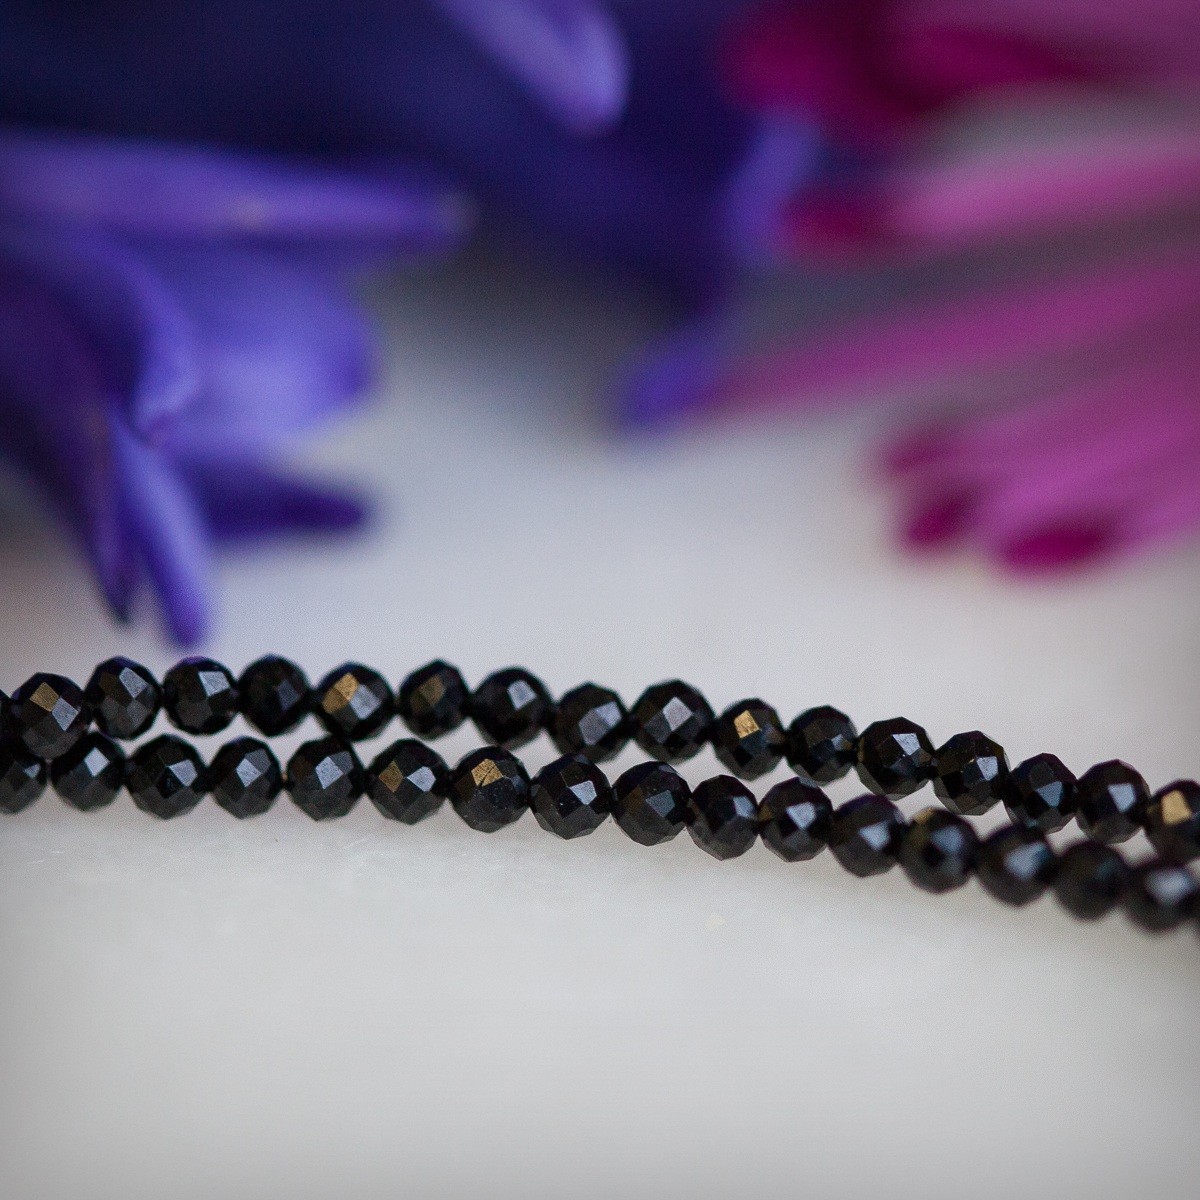 Black spinel necklaces secondary